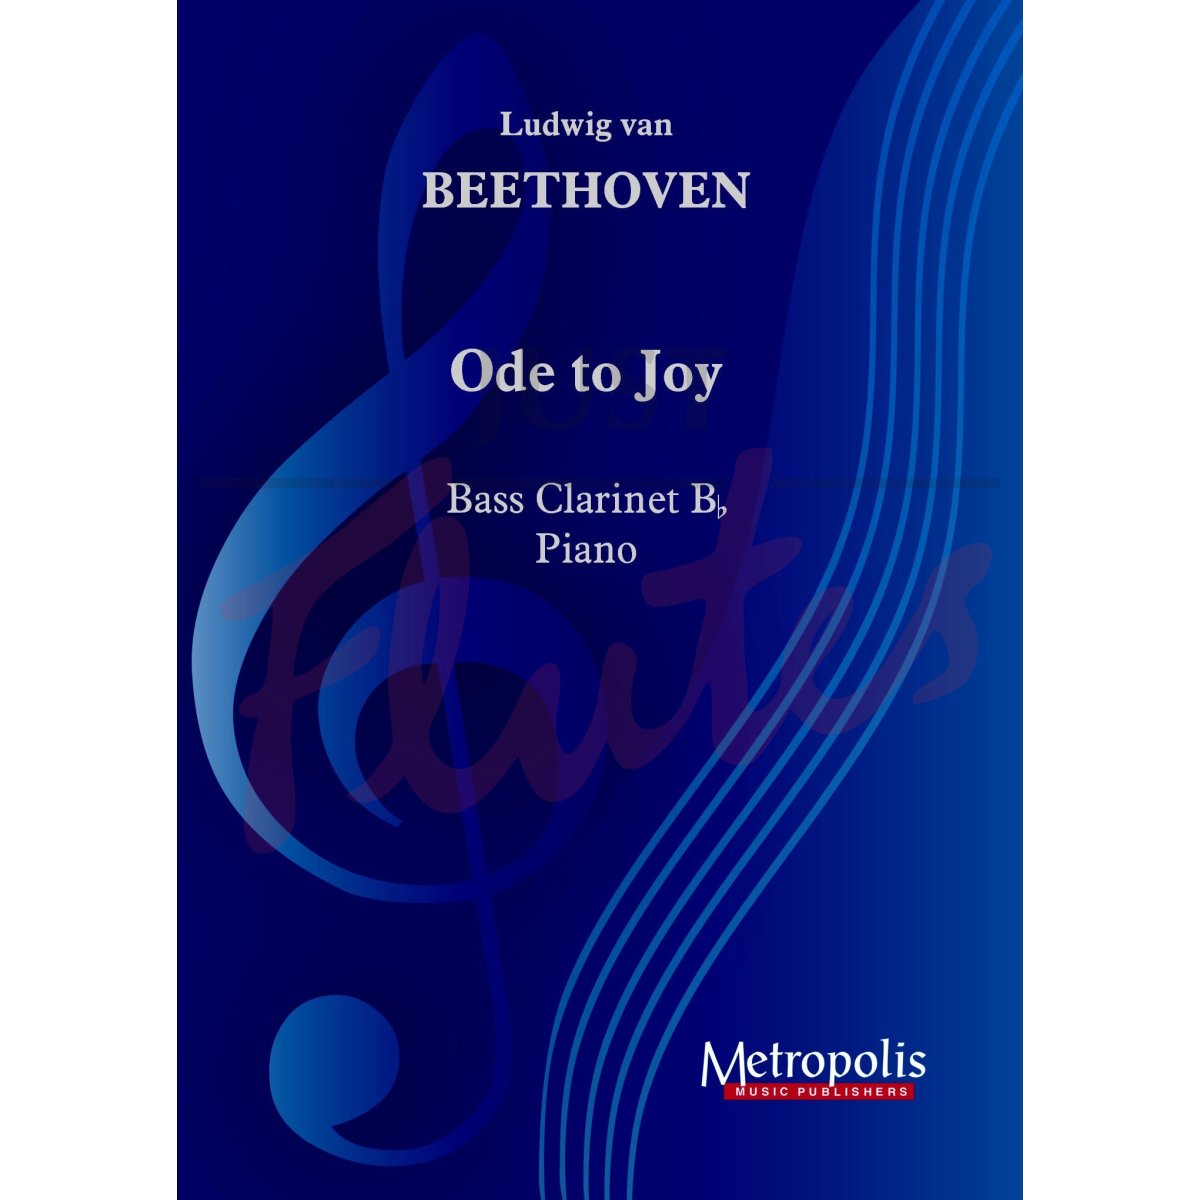 Ode to Joy for Bass Clarinet and Piano